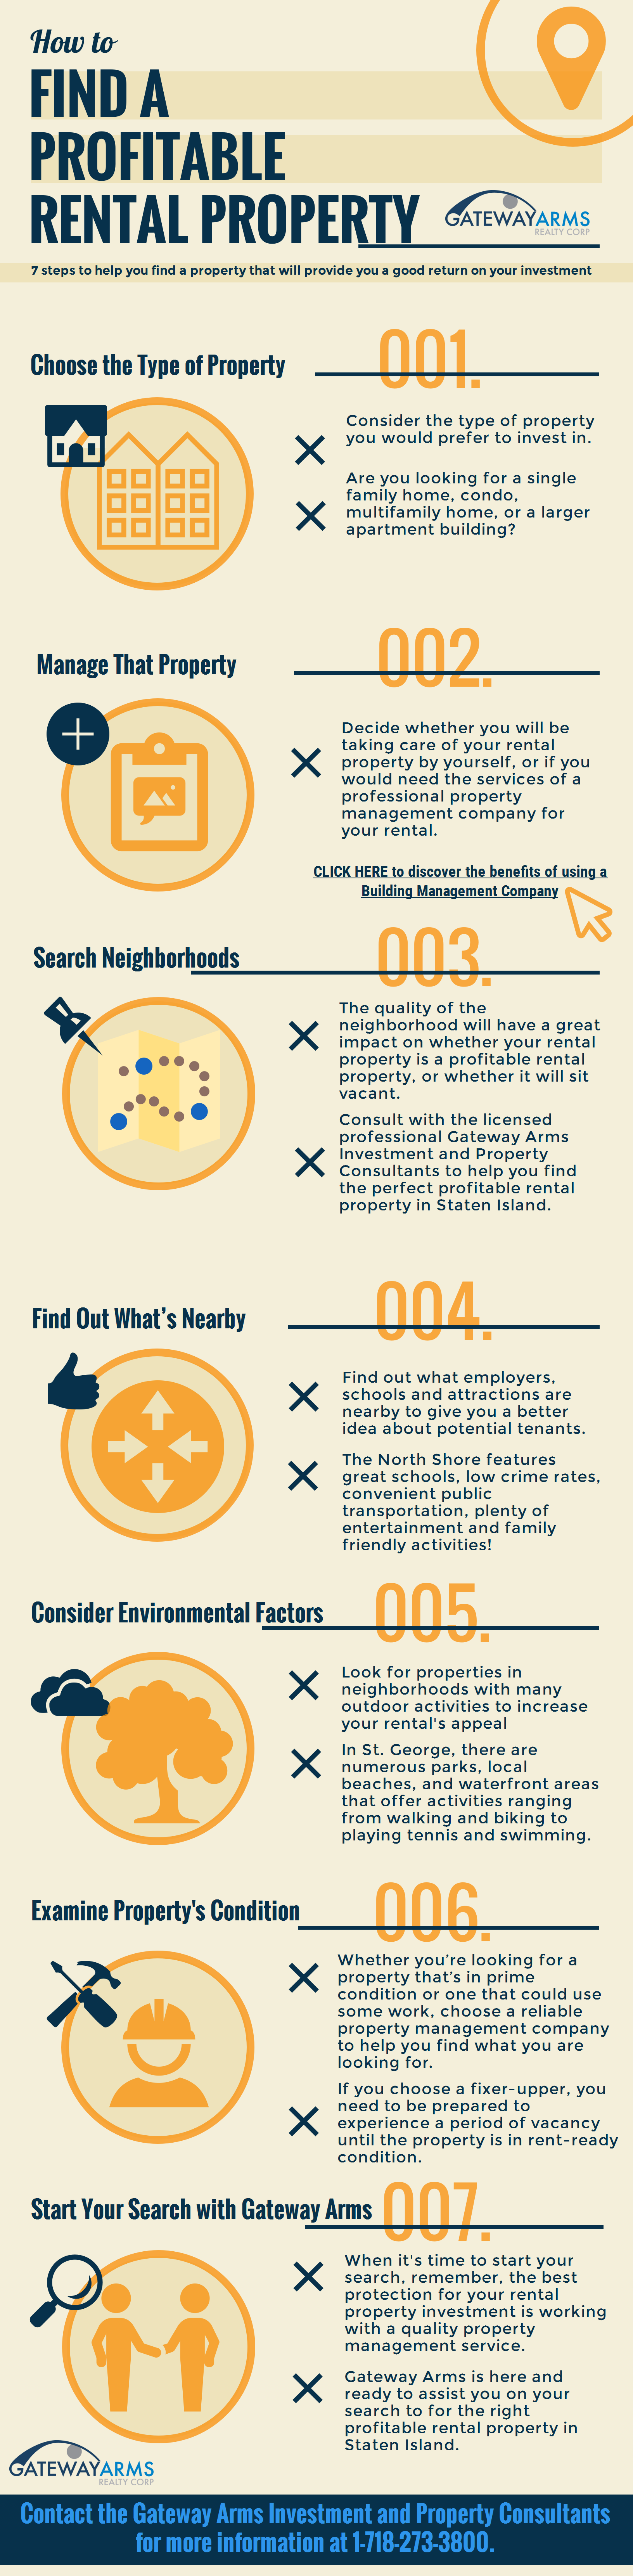 How to Find a Profitable Rental Property [INFOGRAPHIC]